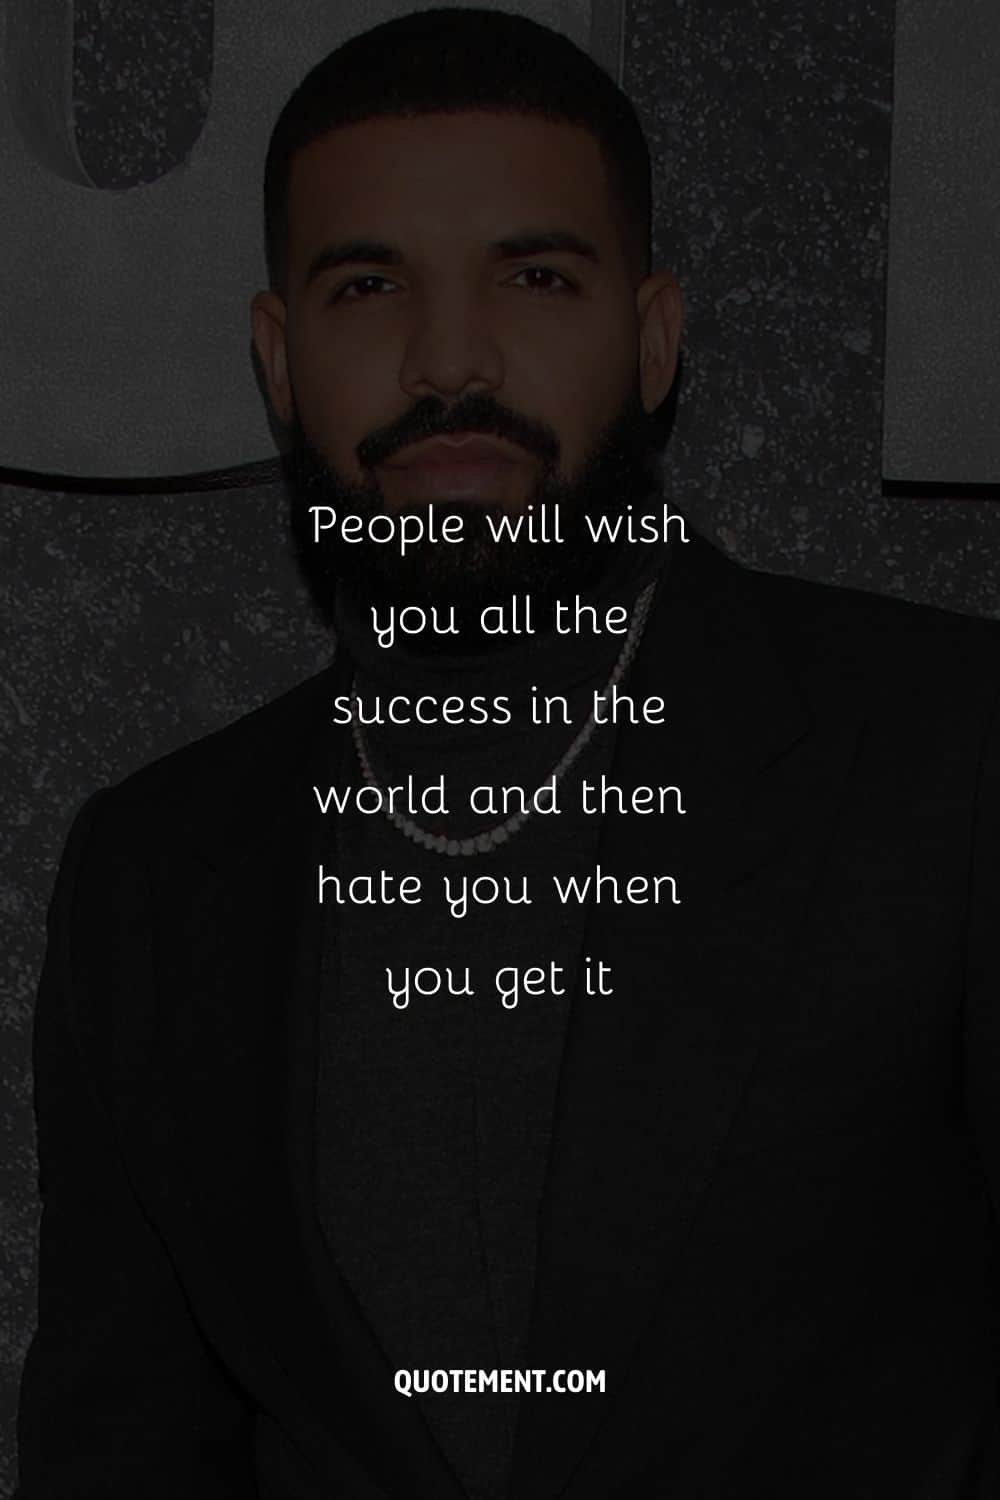 People will wish you all the success in the world and then hate you when you get it.